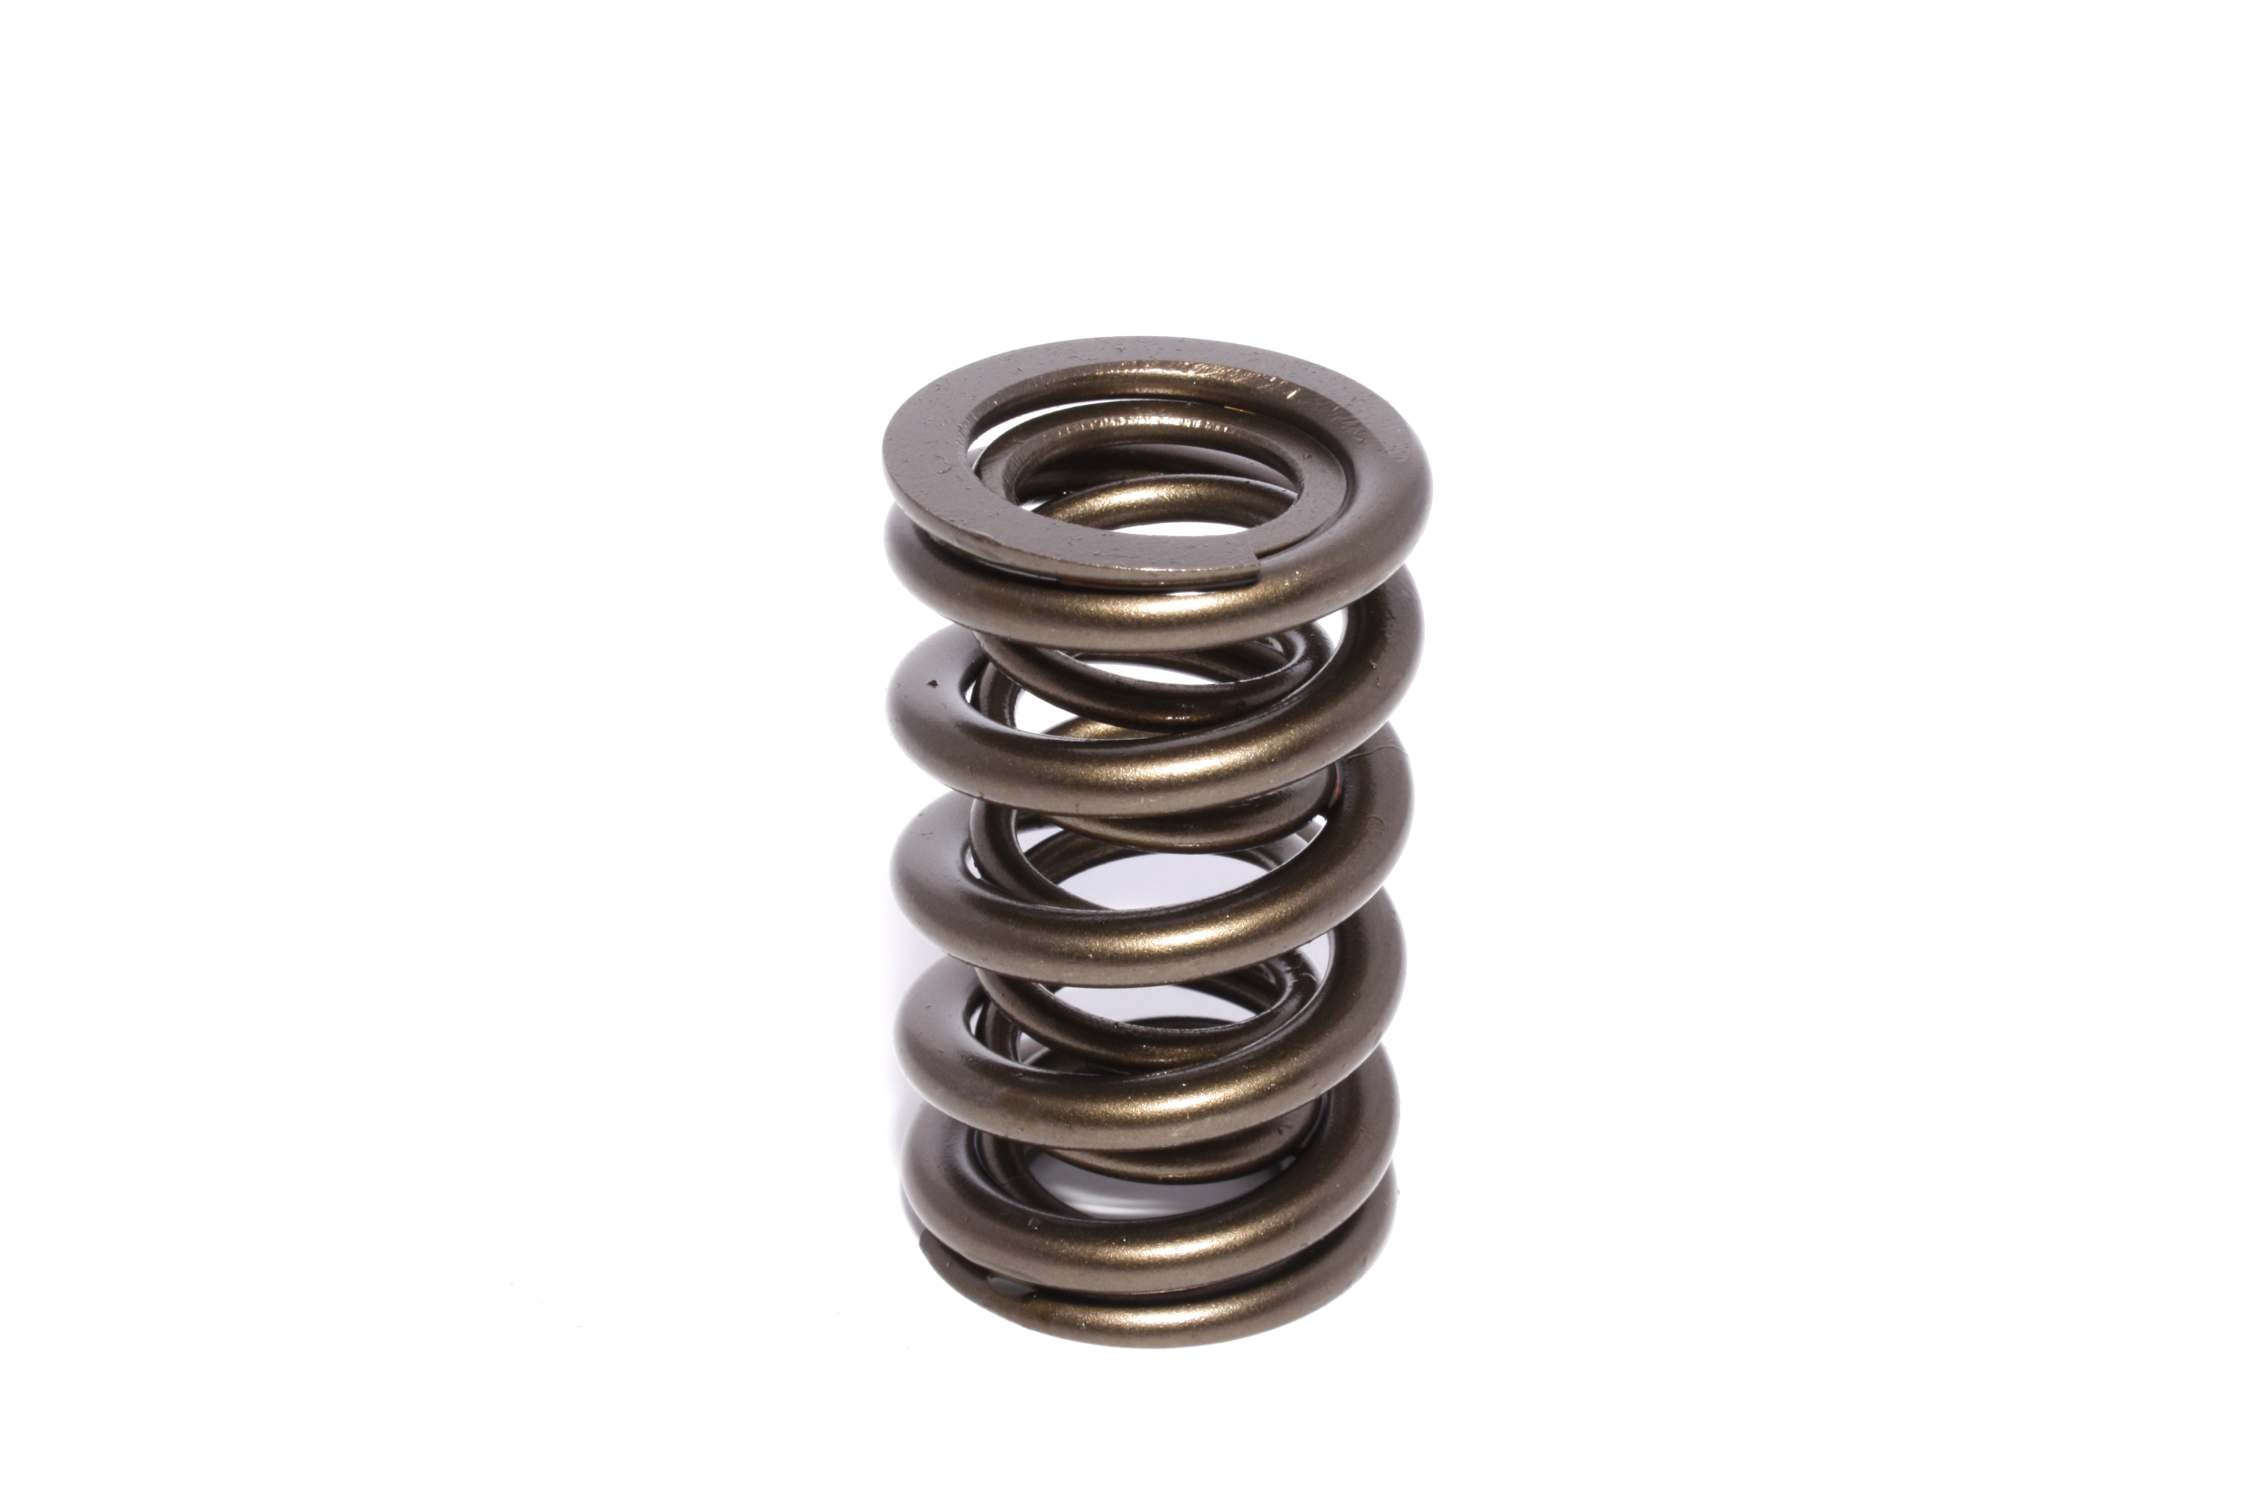 Competition Cams 988-1 Dual Valve Spring Assemblies Valve Springs